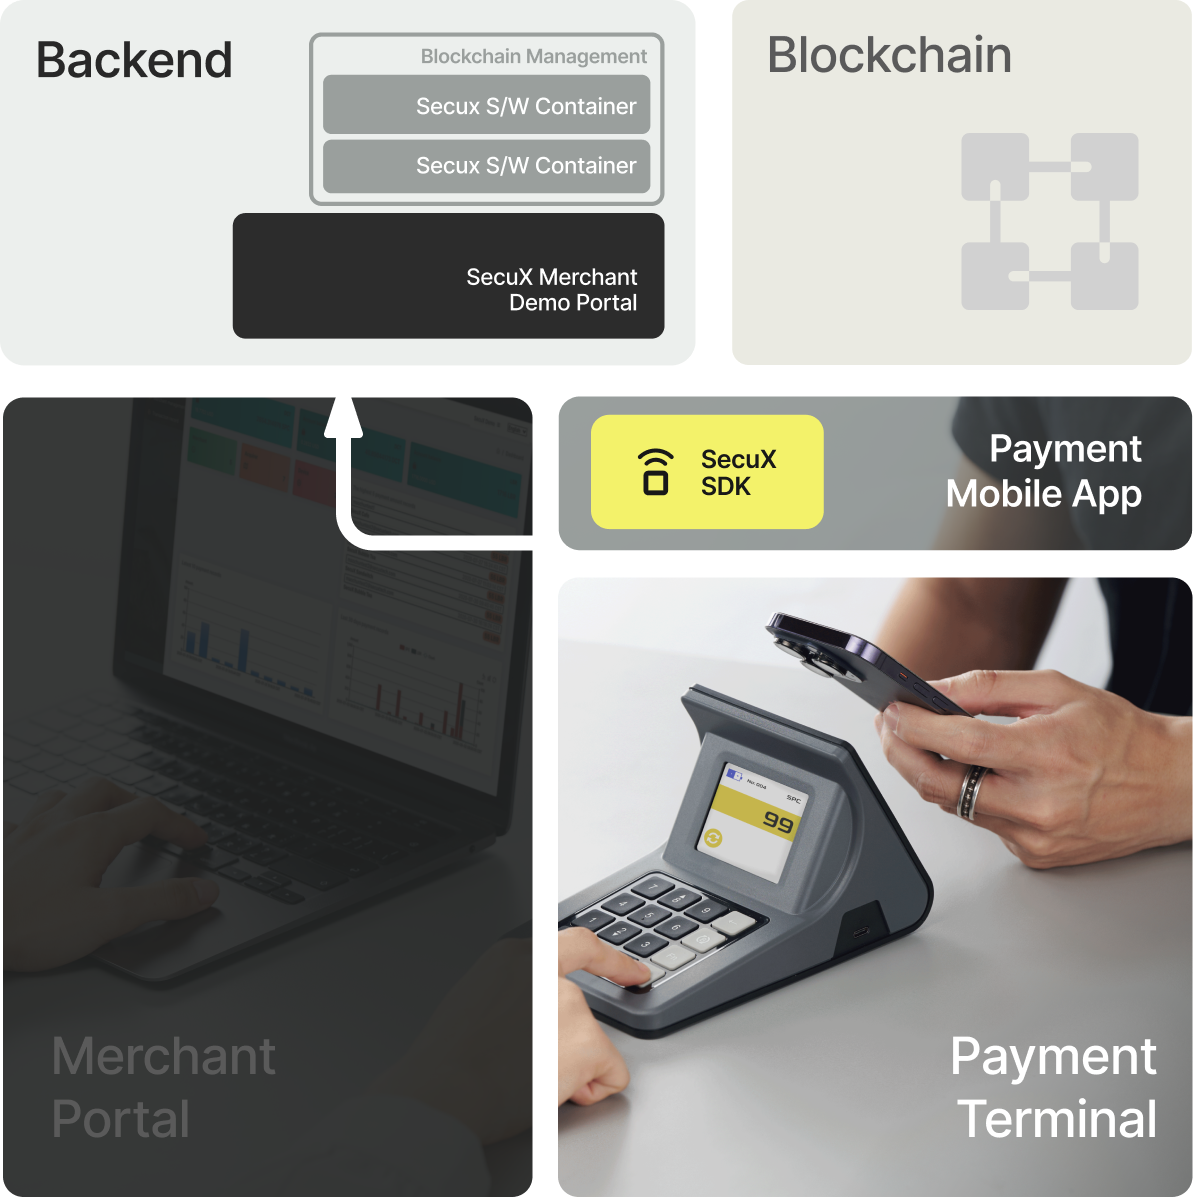 App send merchant ID & payment data after confirm-to-pay